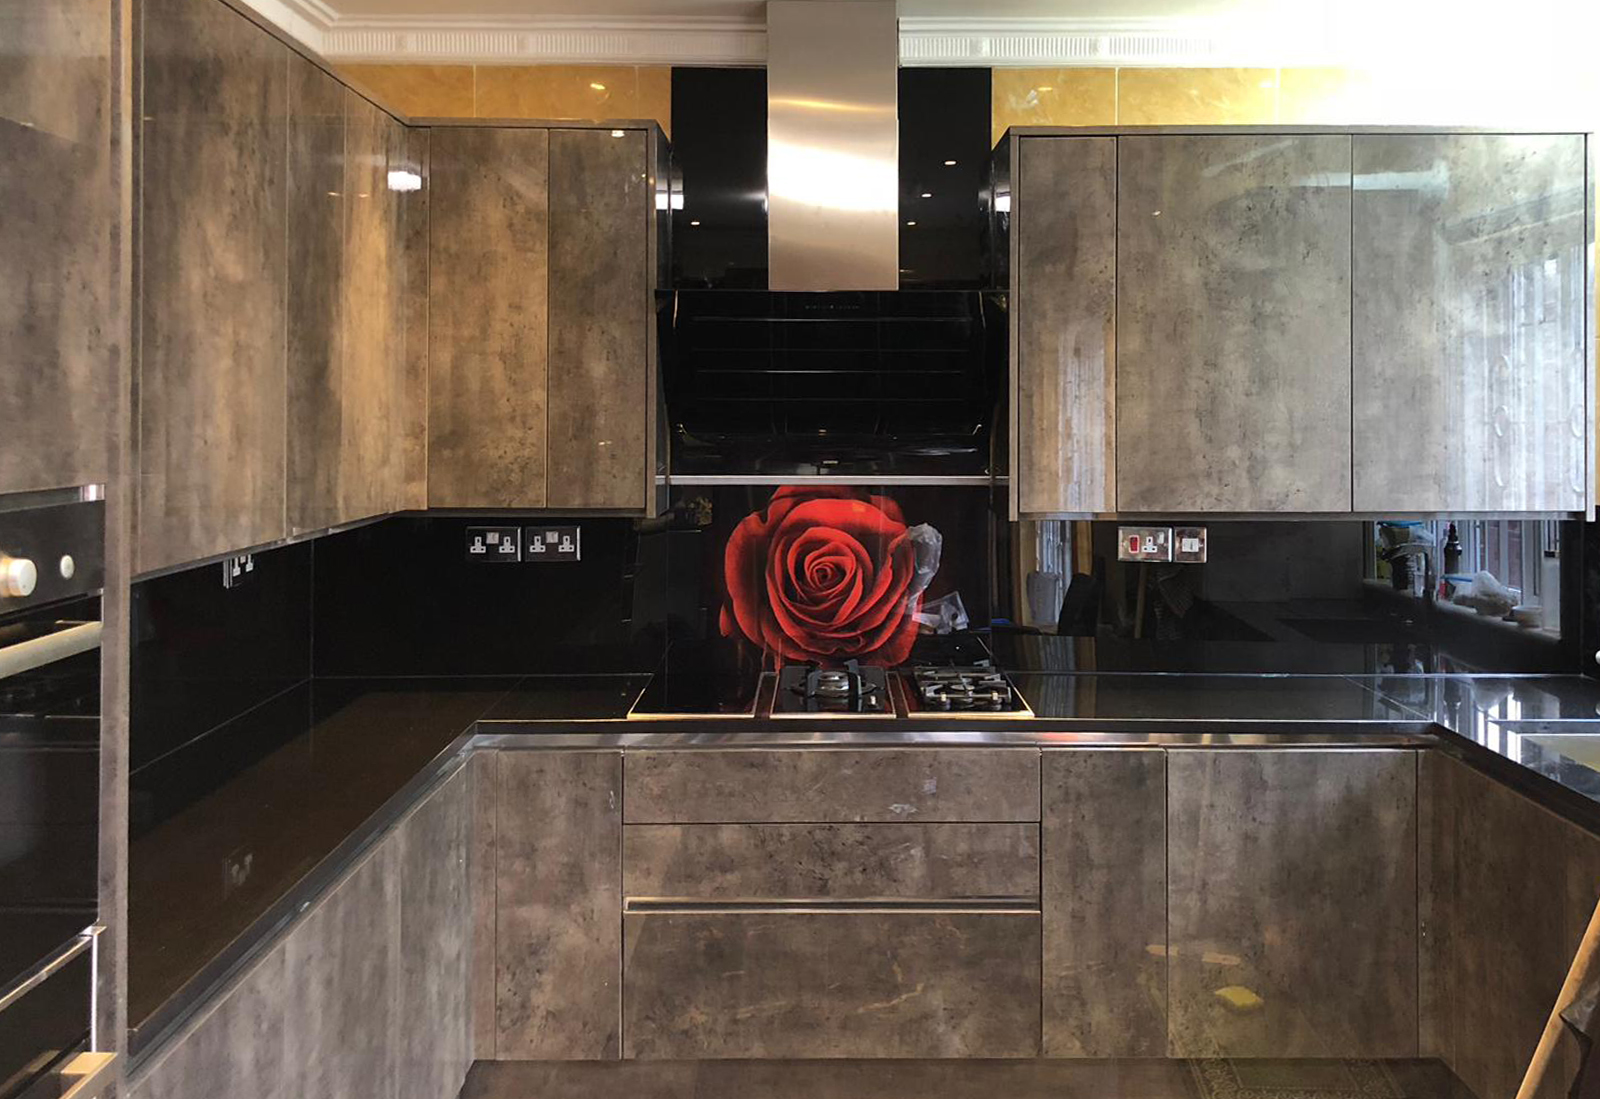 mirror black Kitchen splashback with beautiful rose picture behind the gas stove